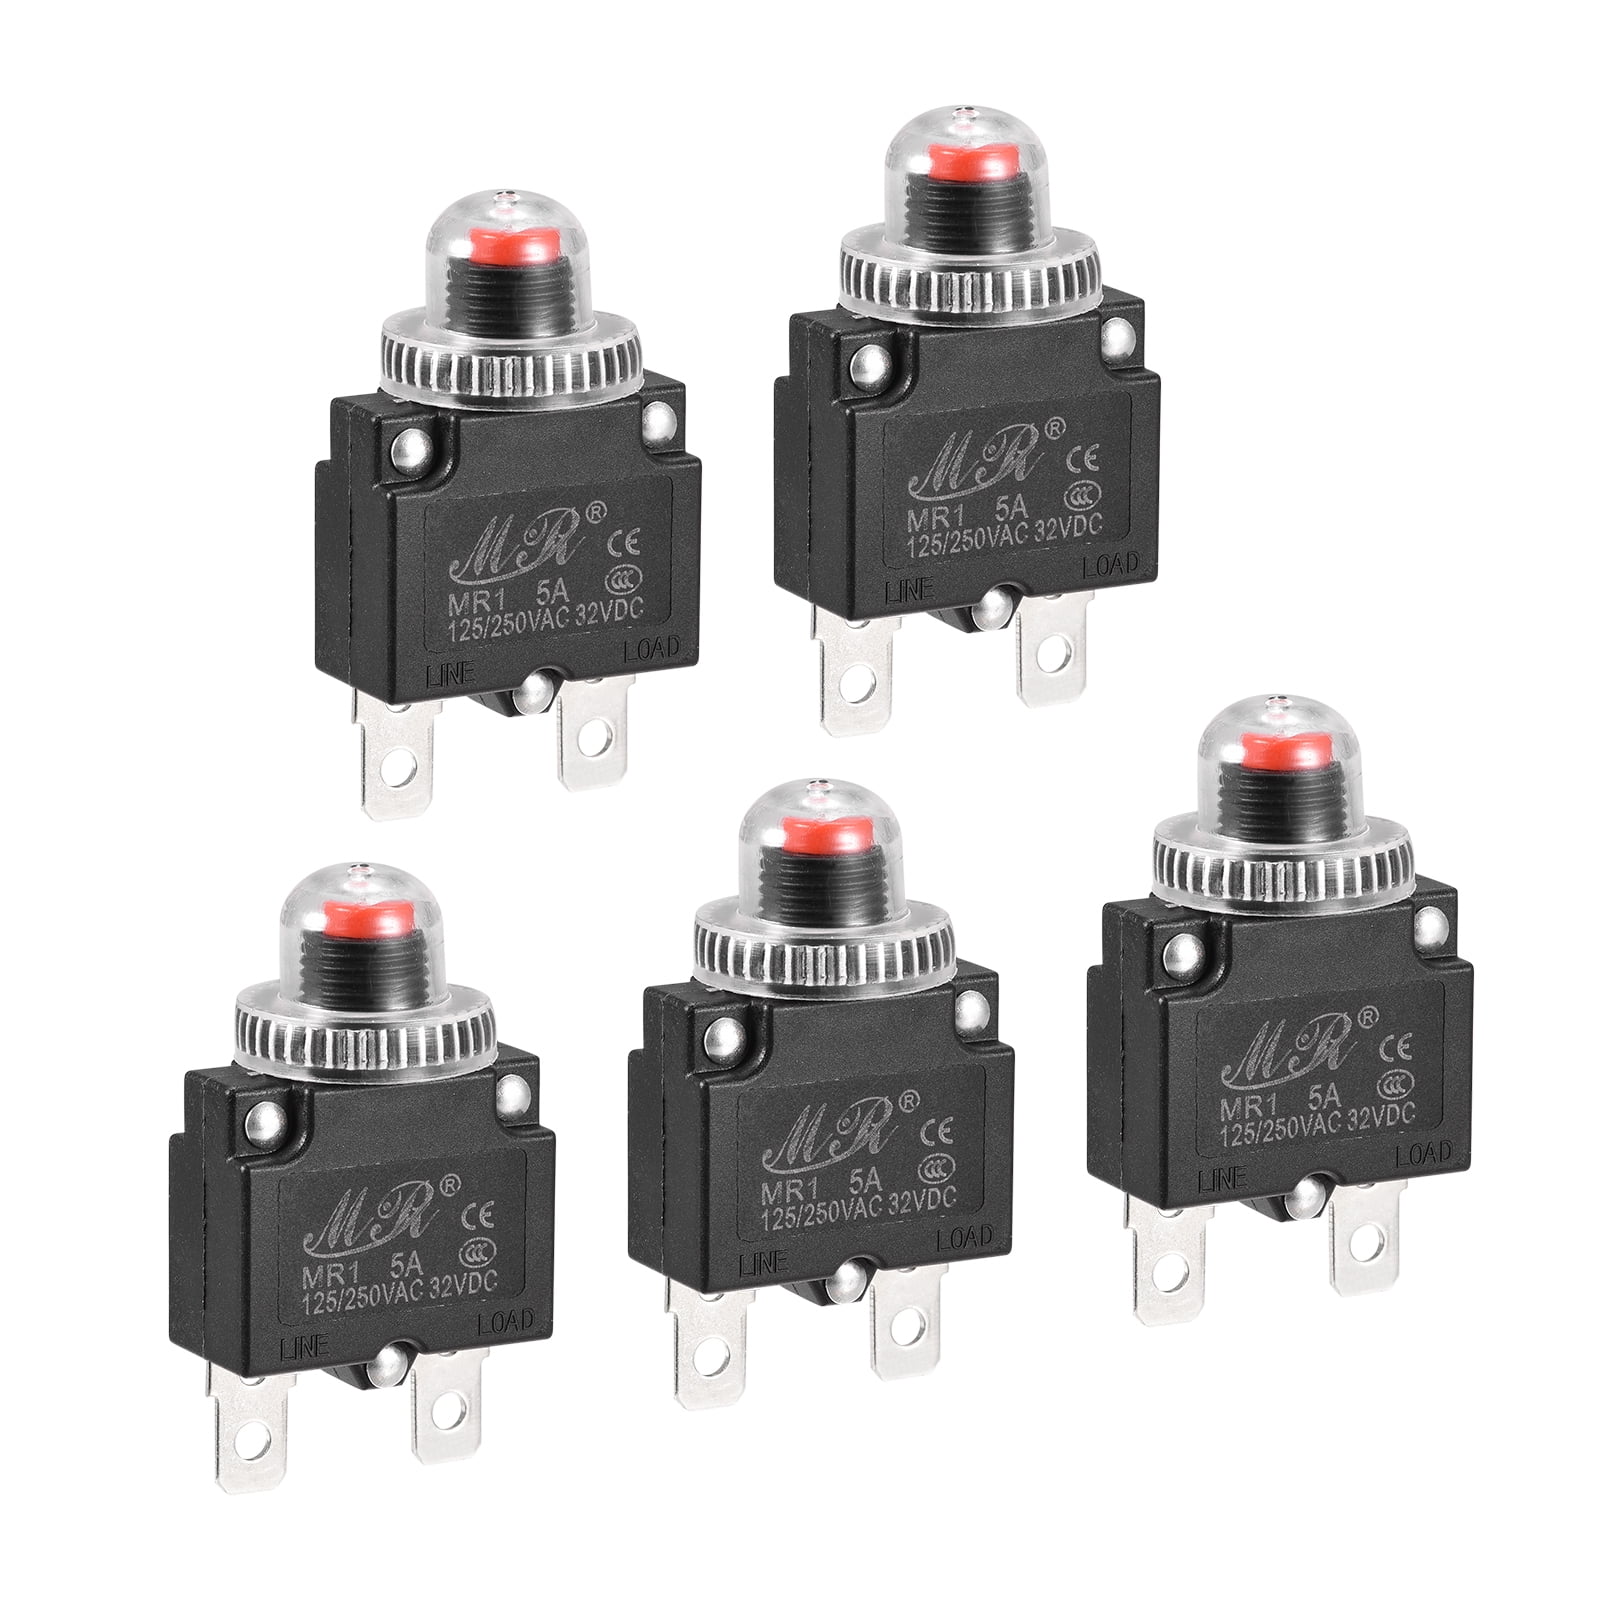 uxcell Thermal Circuit Breakers 11A 125/250V AC 32V DC Push Button Reset Overload Protector Switch with Waterproof Cap 2 Pcs 